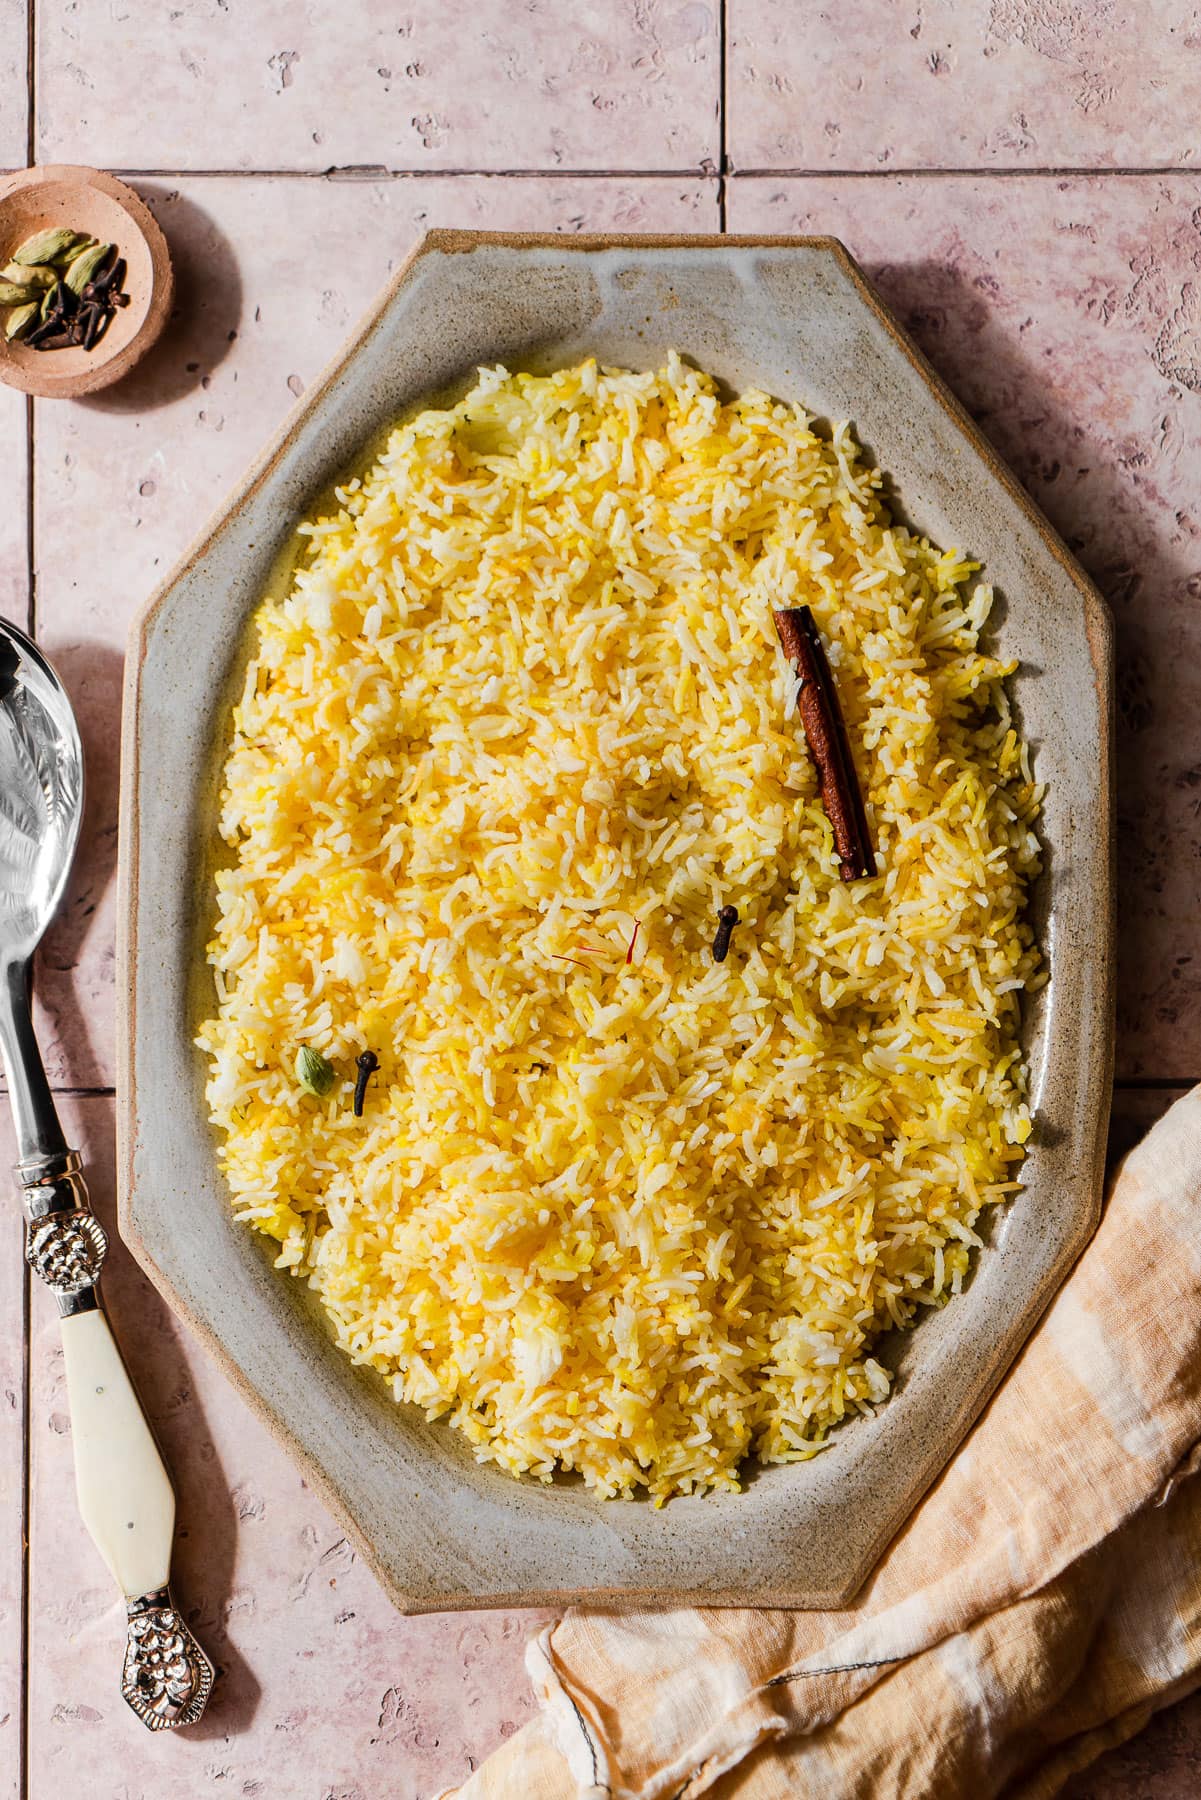 Indian Saffron rice in a platter with spices and a serving spoon.